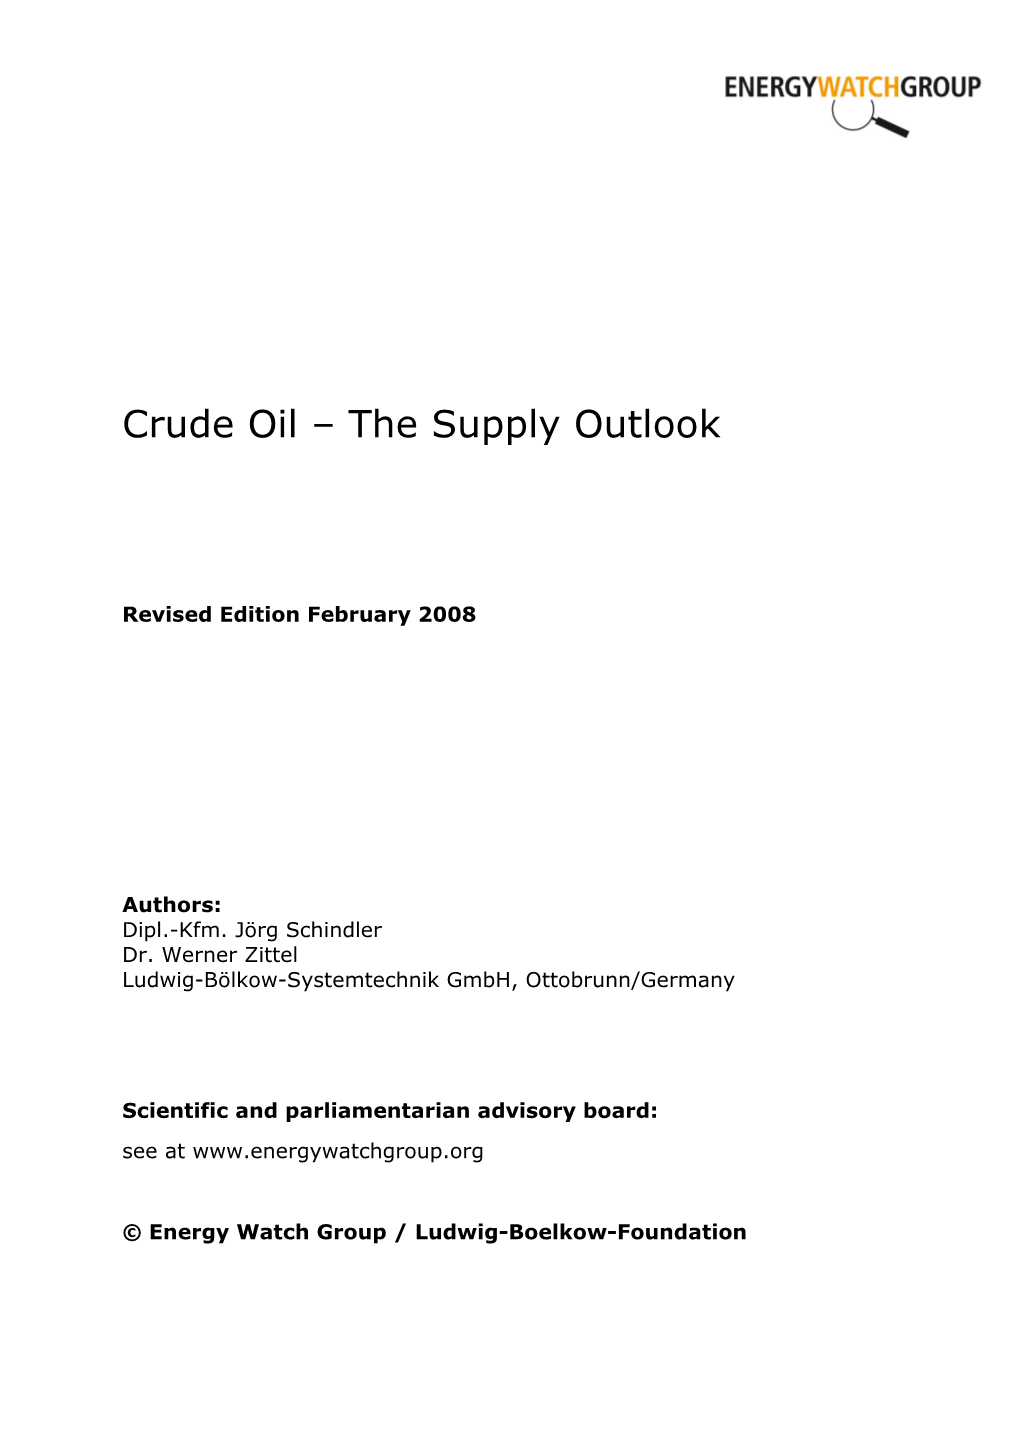 Crude Oil – the Supply Outlook